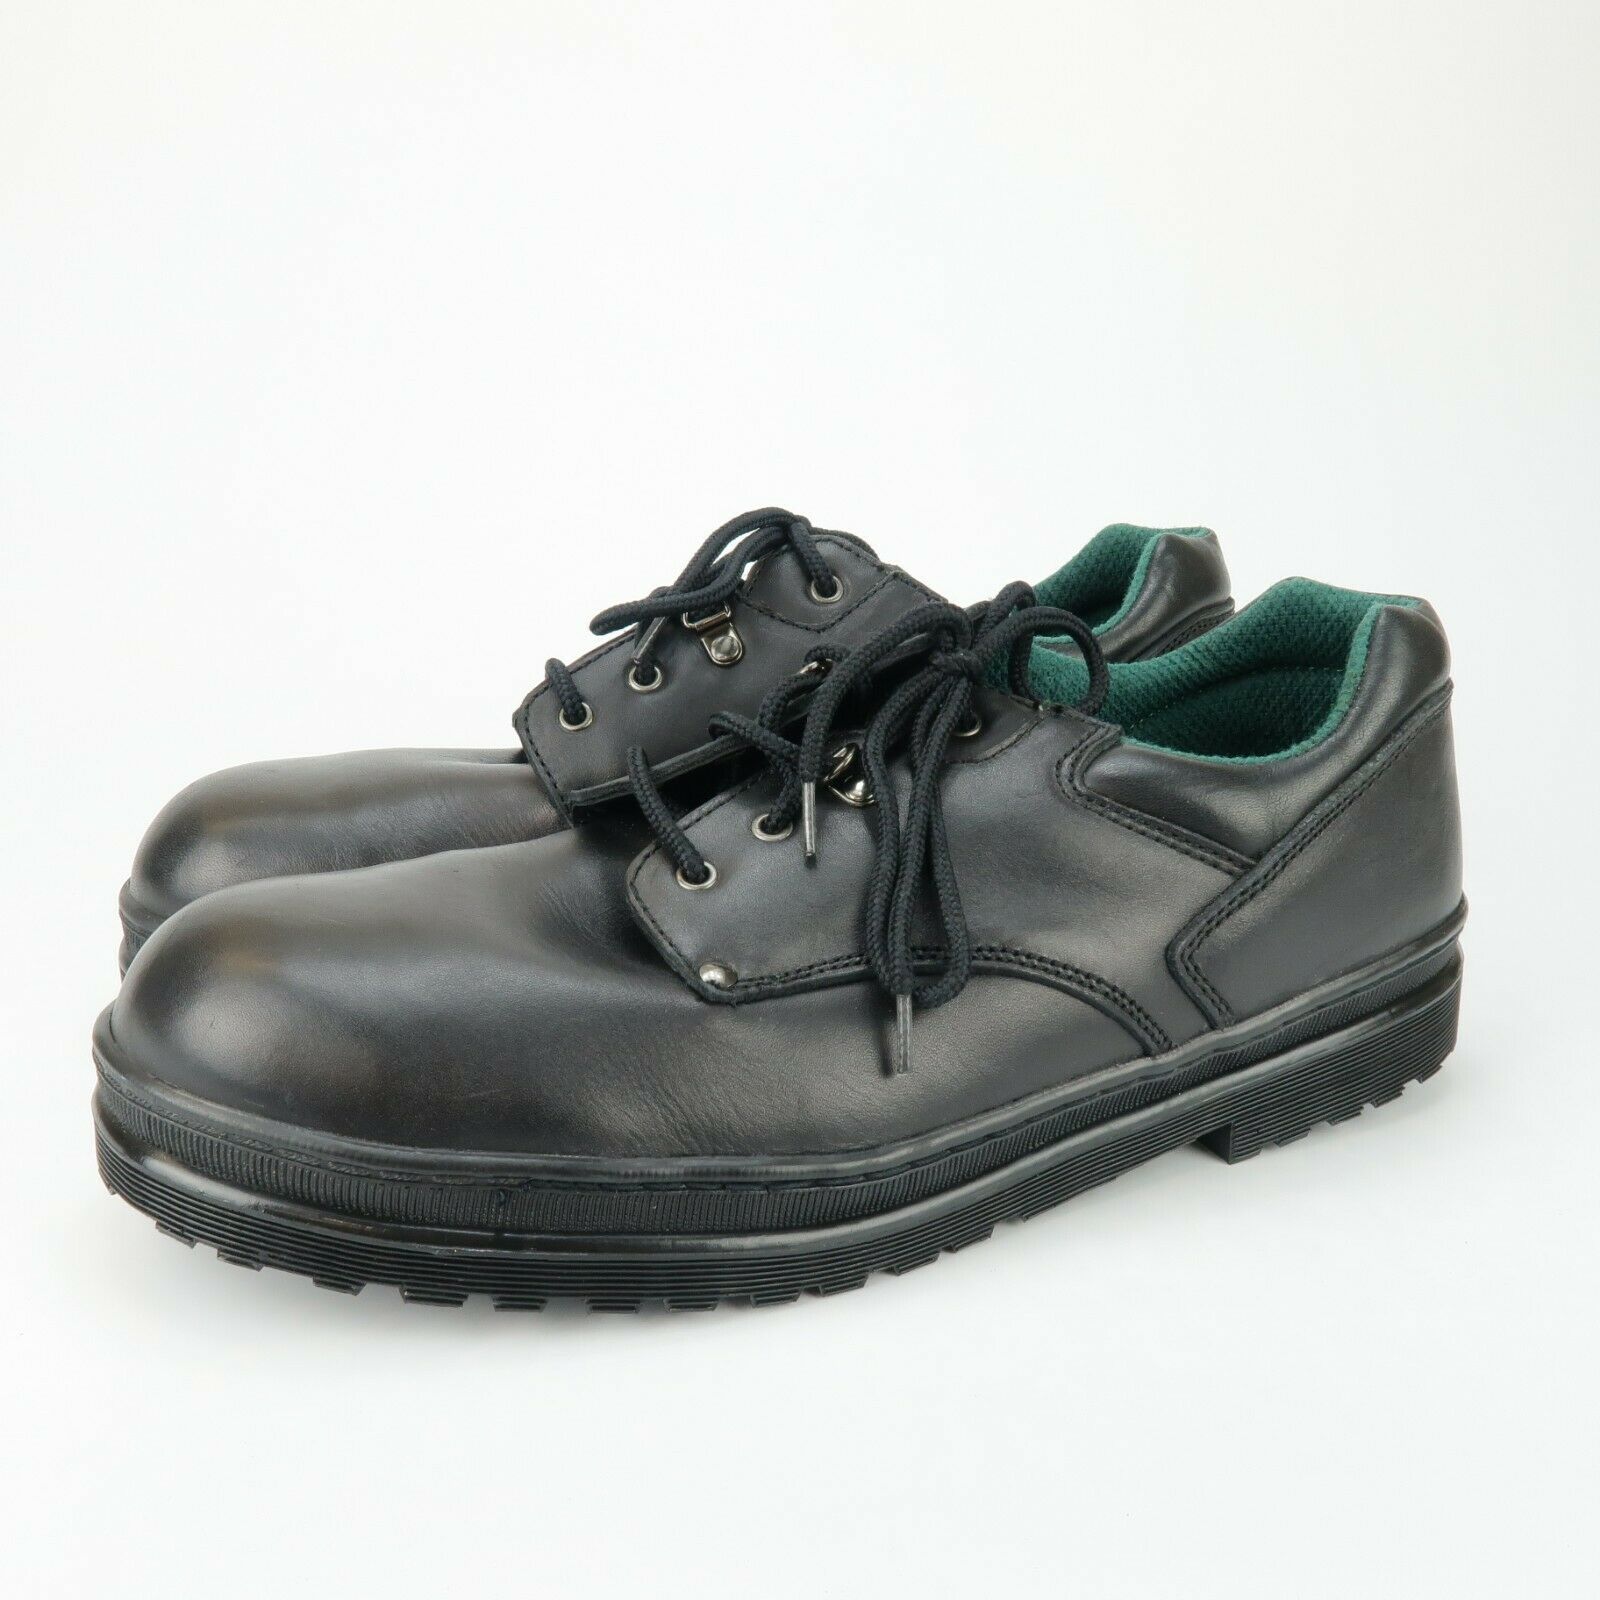 Florsheim protector mens work shoes black leather steel Toe Size 13 M WORN ONCE